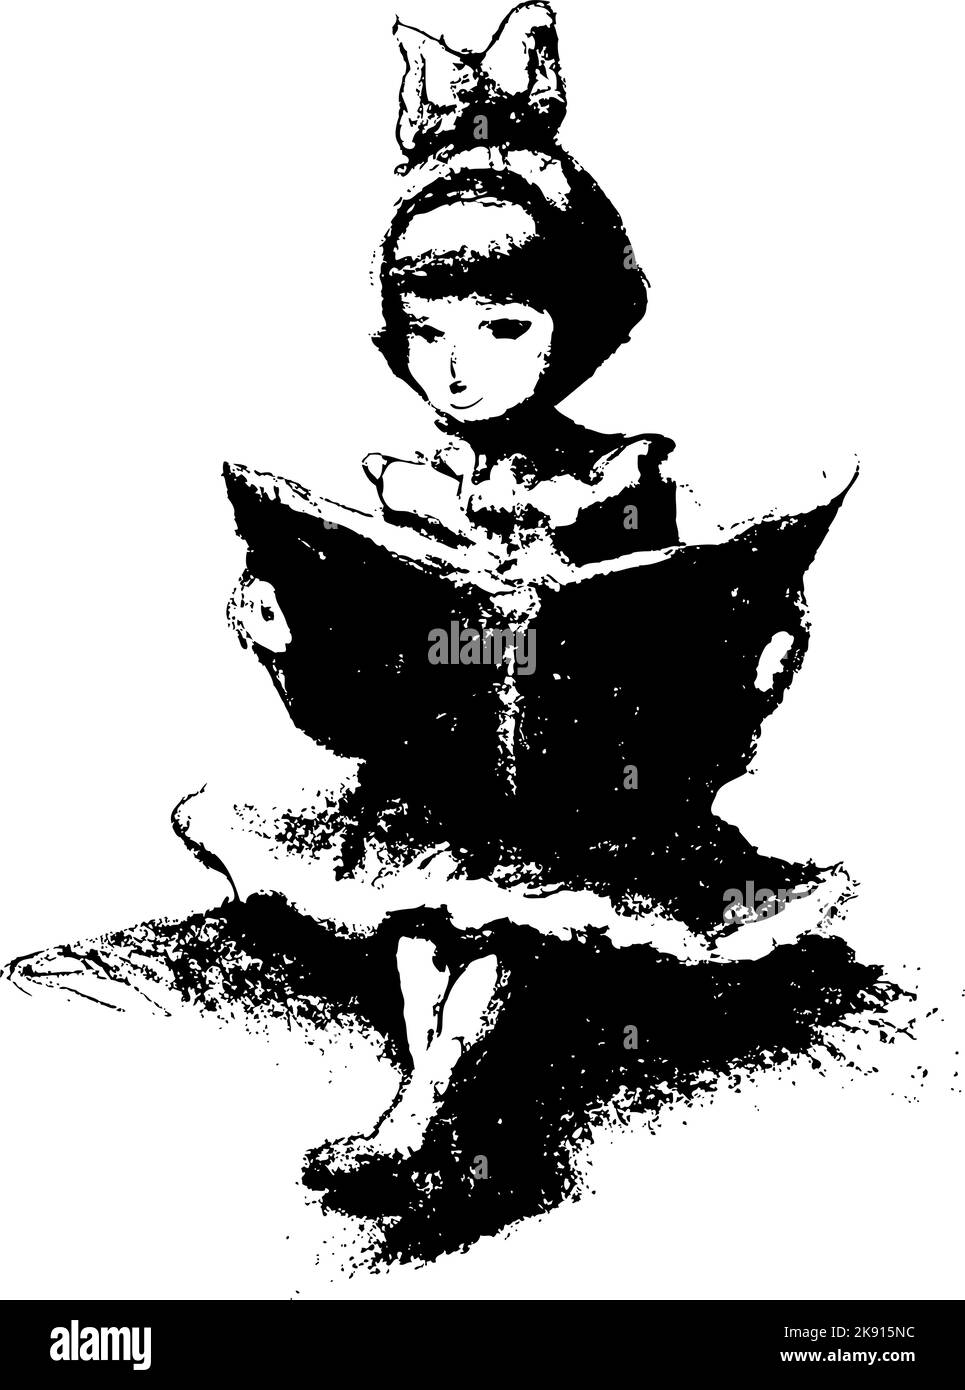 Young girl sitting with a large book, reading. Bow in her hair, black and white hand drawn illustration. Stock Vector